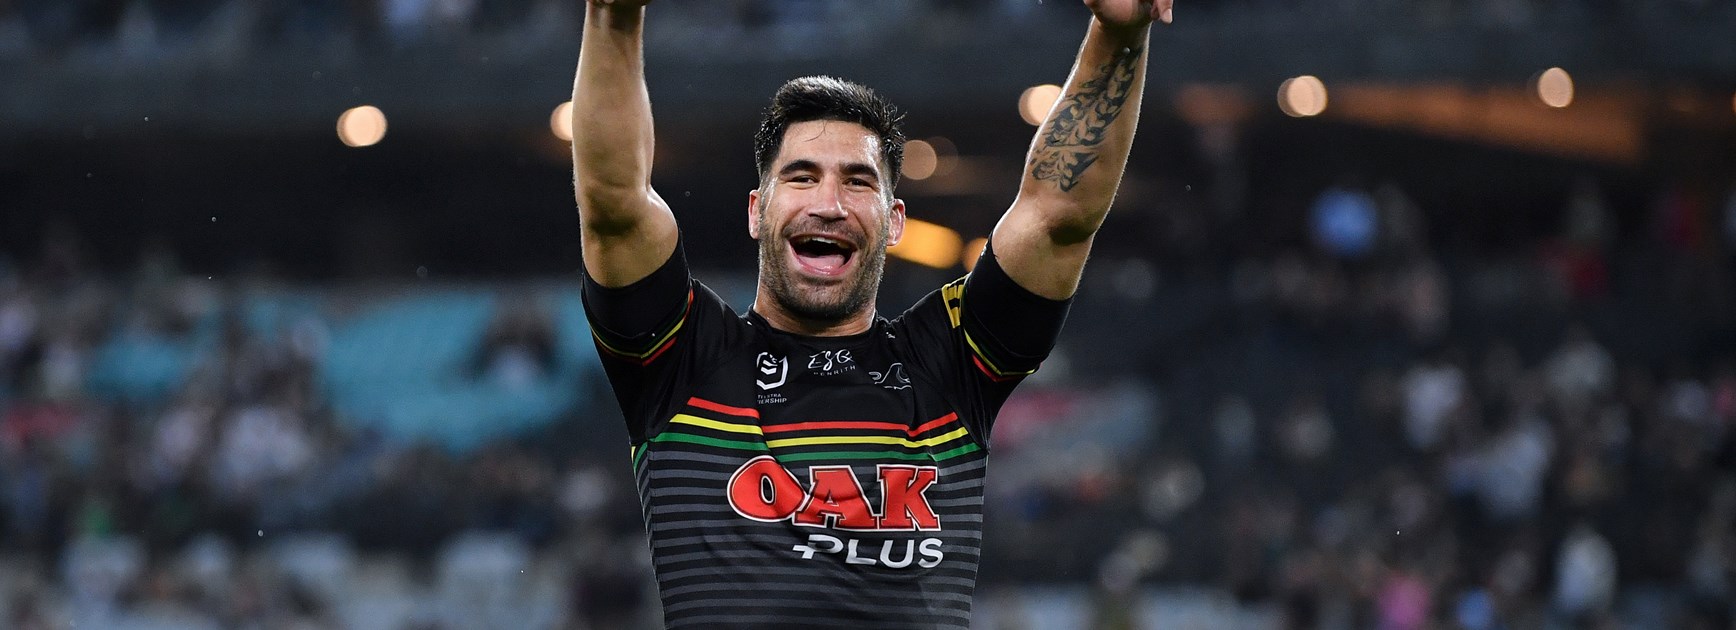 'Am I over the hill?': Tamou reveals he considered retiring